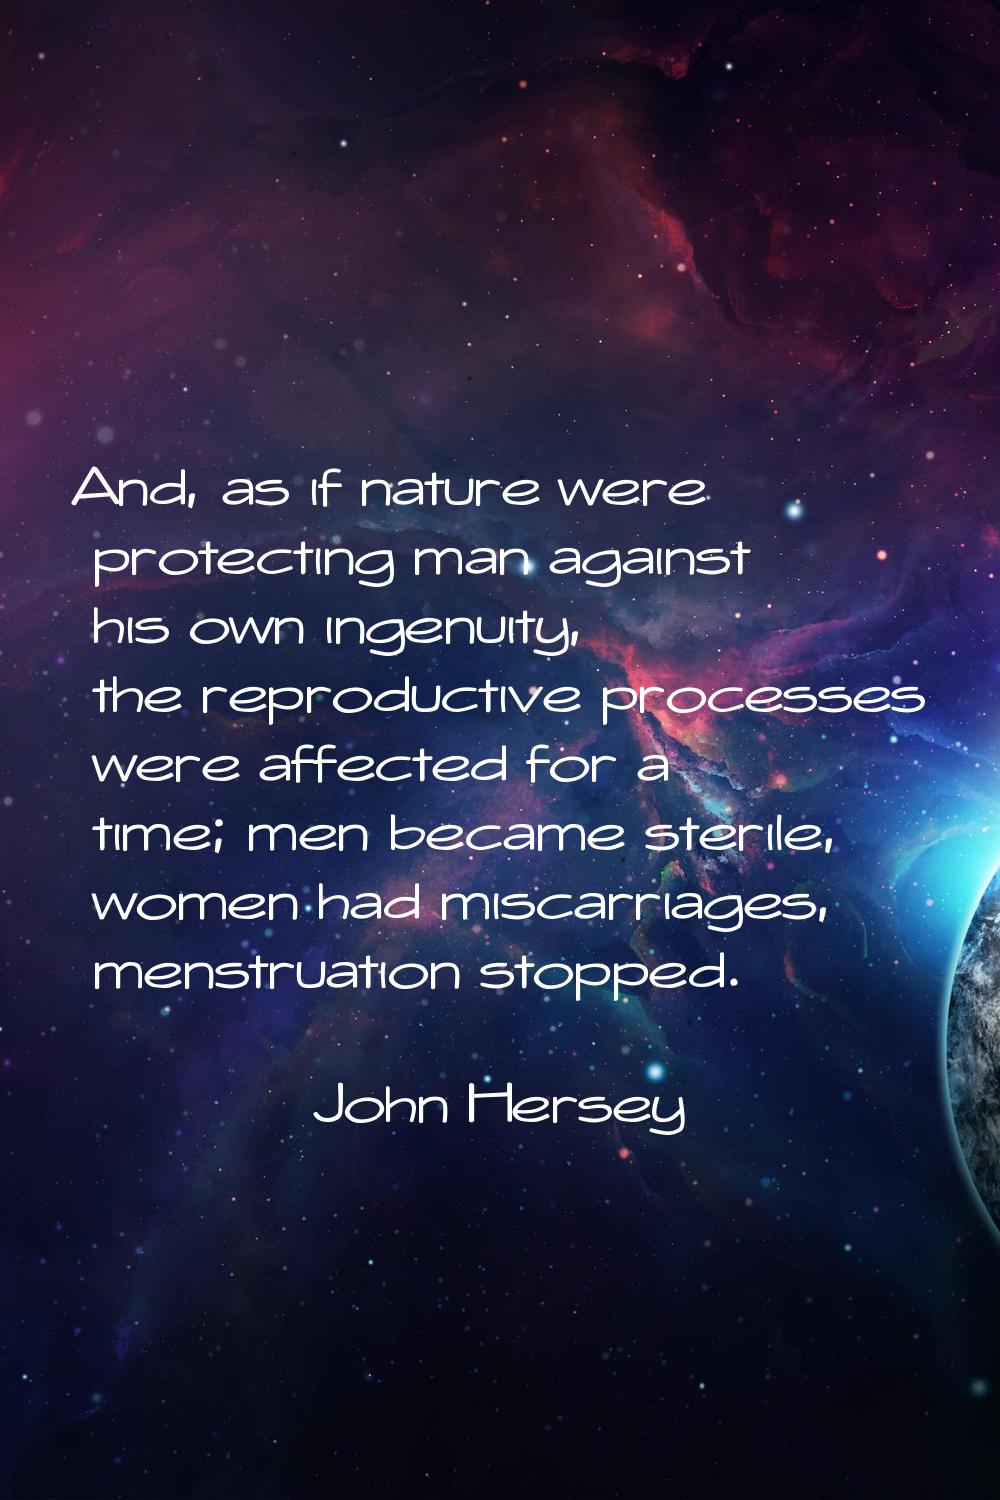 And, as if nature were protecting man against his own ingenuity, the reproductive processes were af